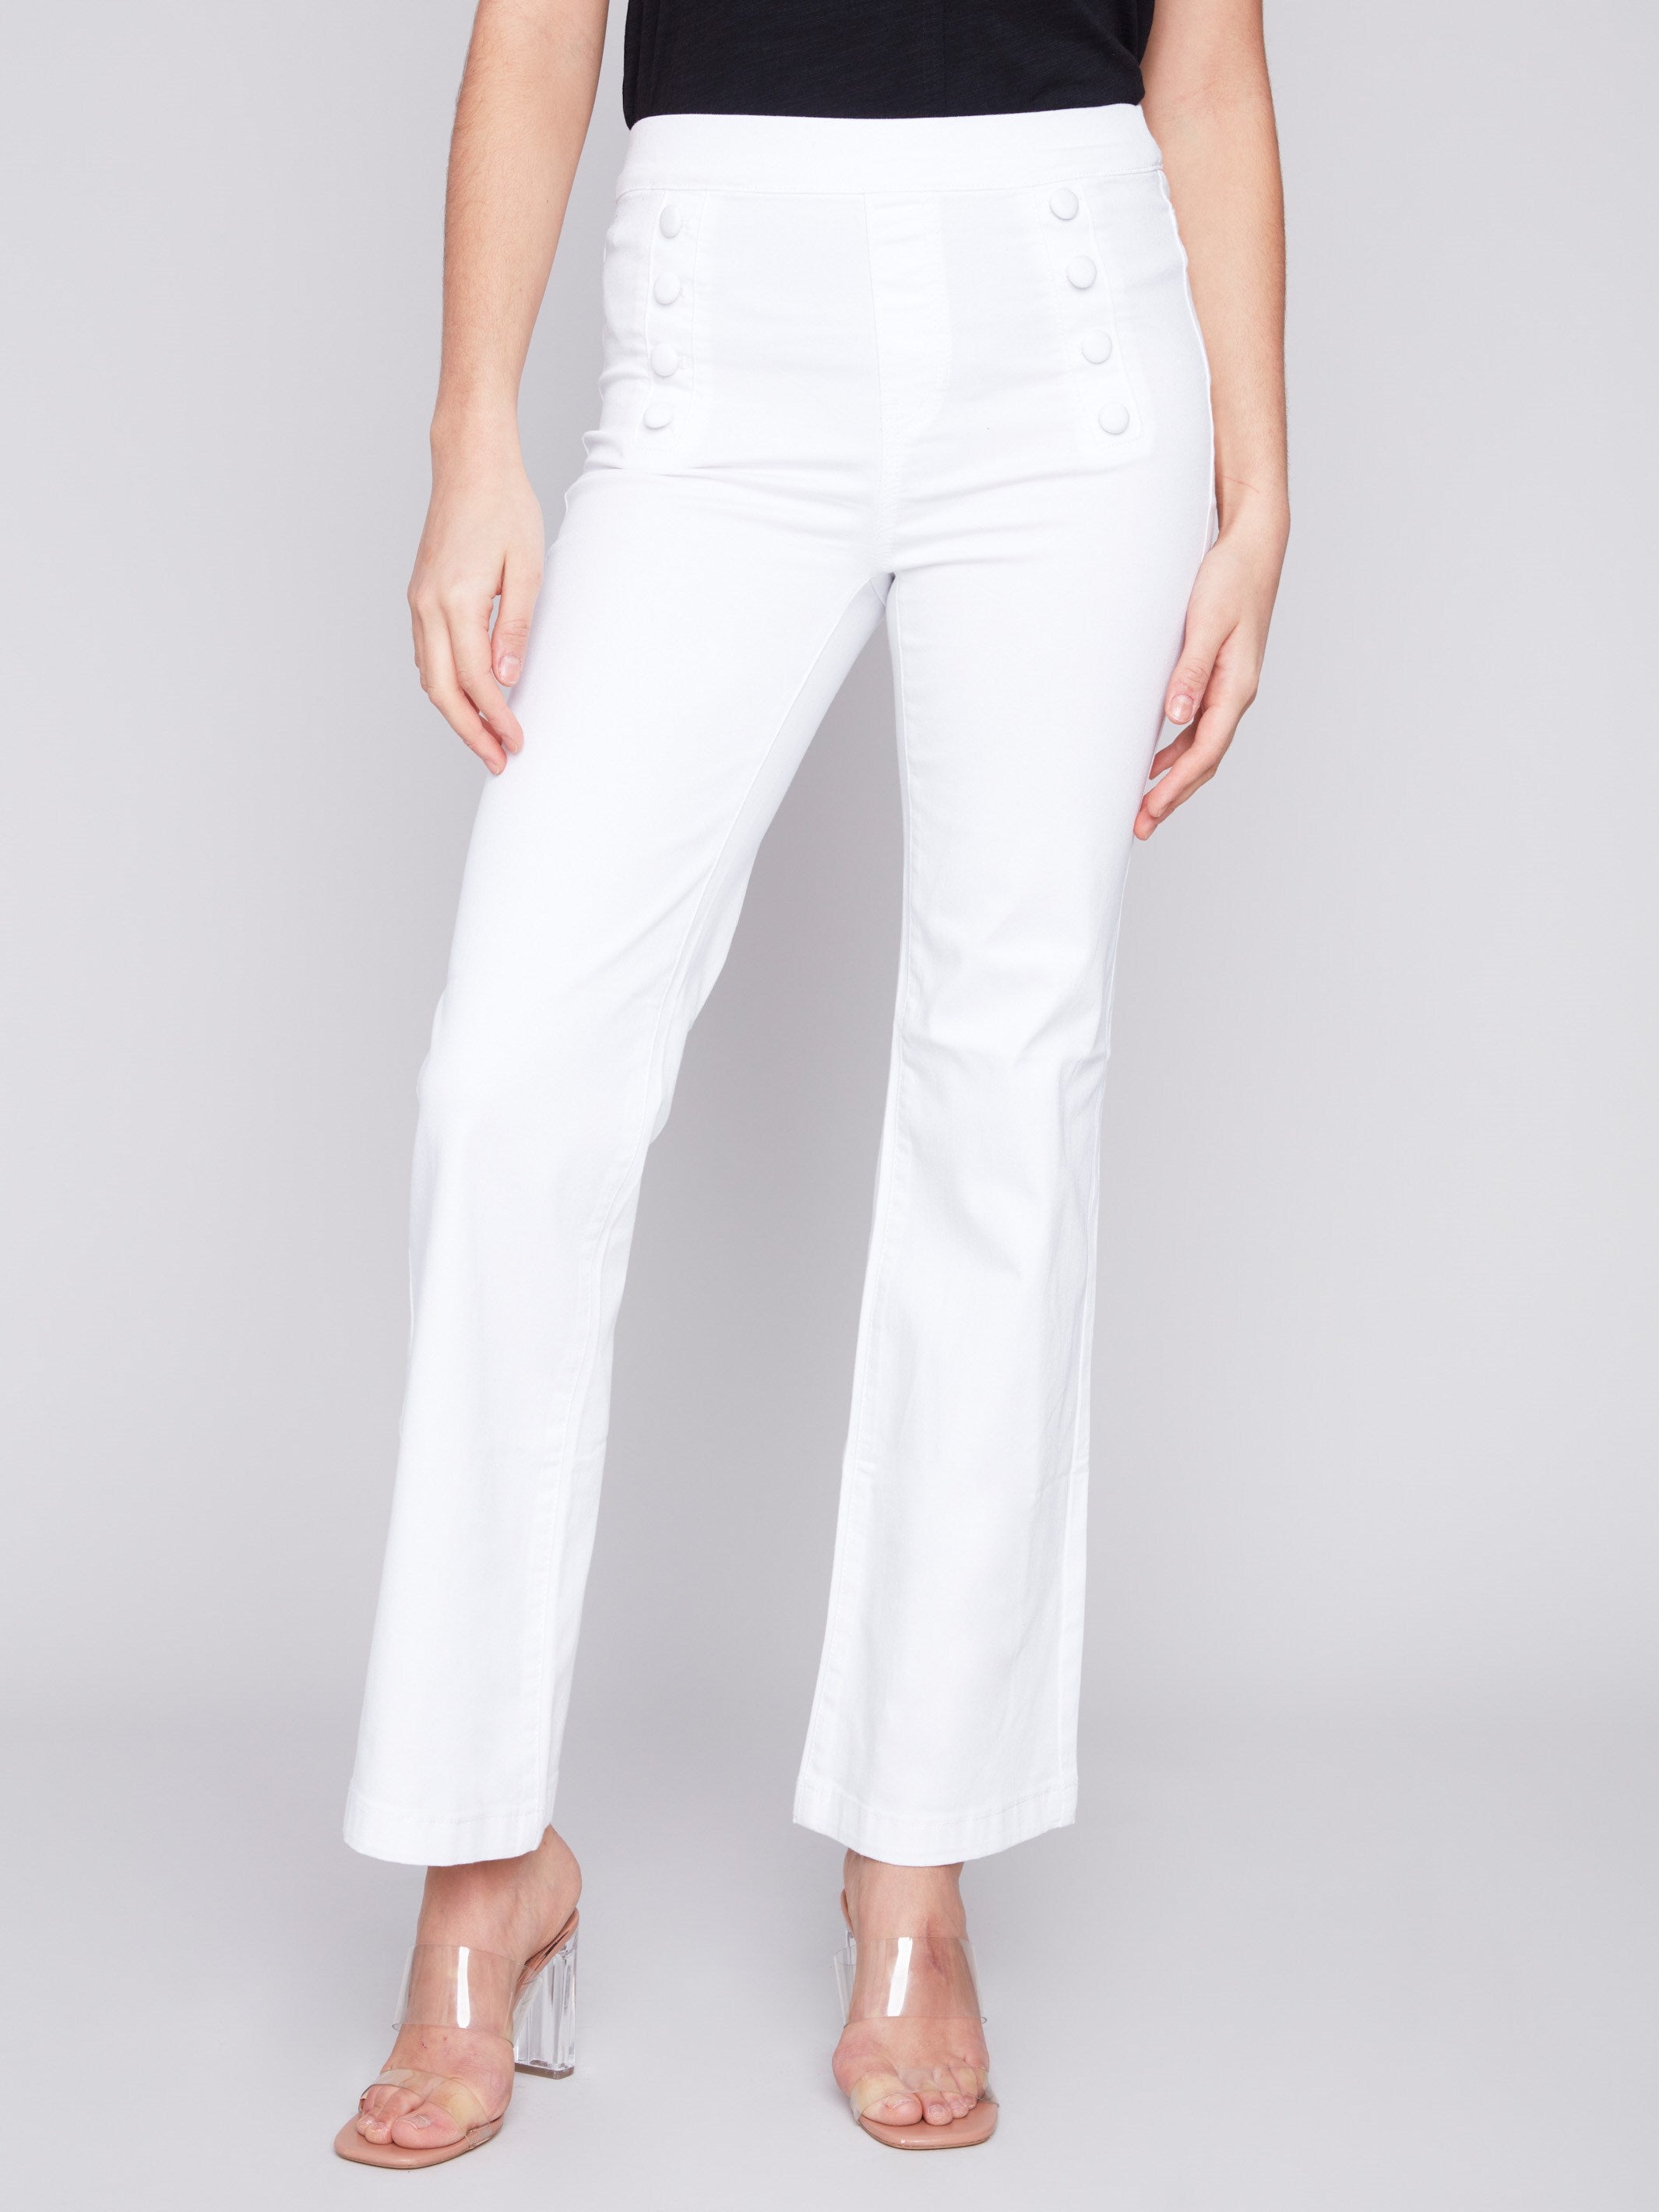 Flare Twill Pants with Decorative Buttons - White - Charlie B Collection Canada - Image 2